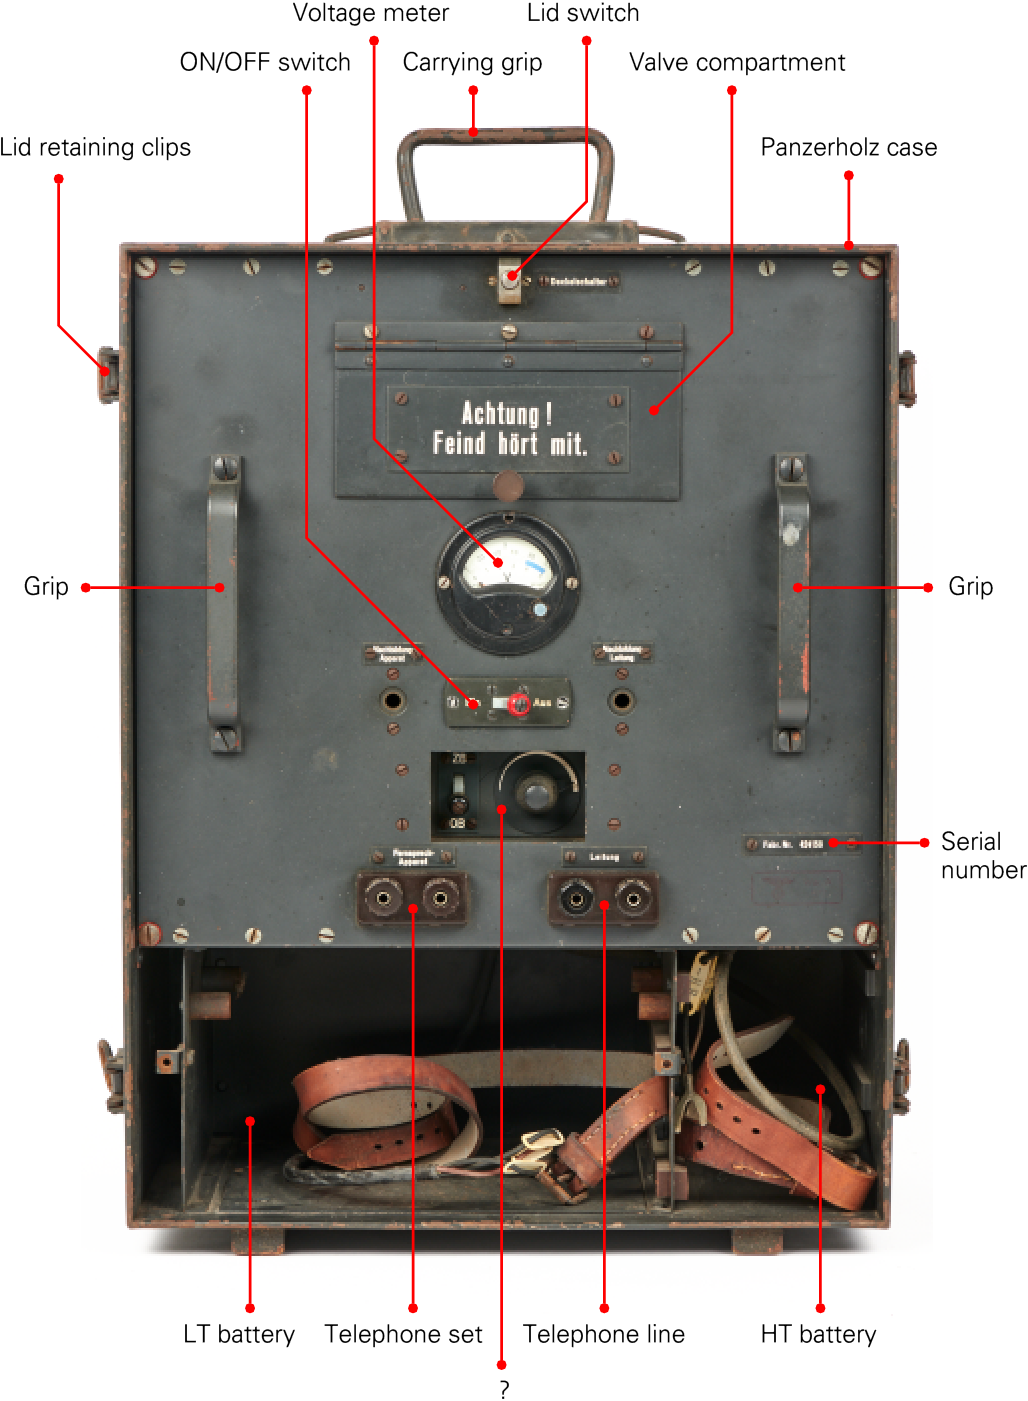 Controls and connections on the front panel of the GK-IIIb